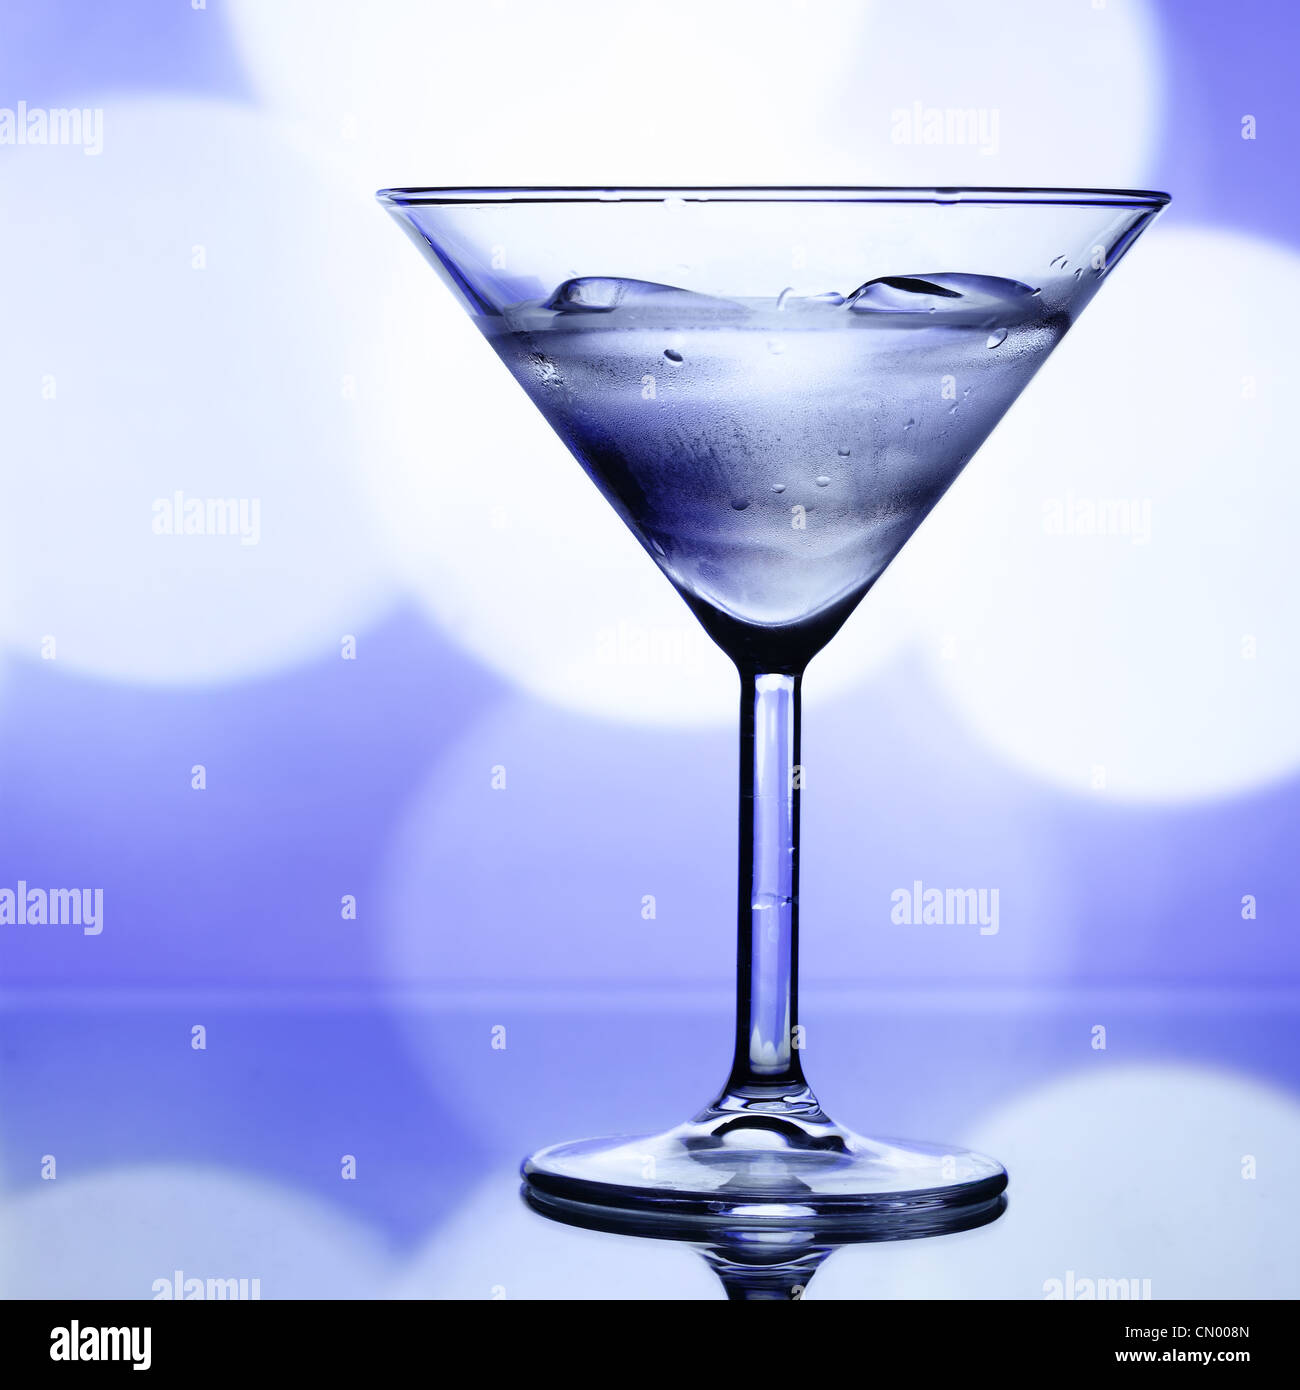 Cocktail glass with ice and holiday lights in the background Stock Photo